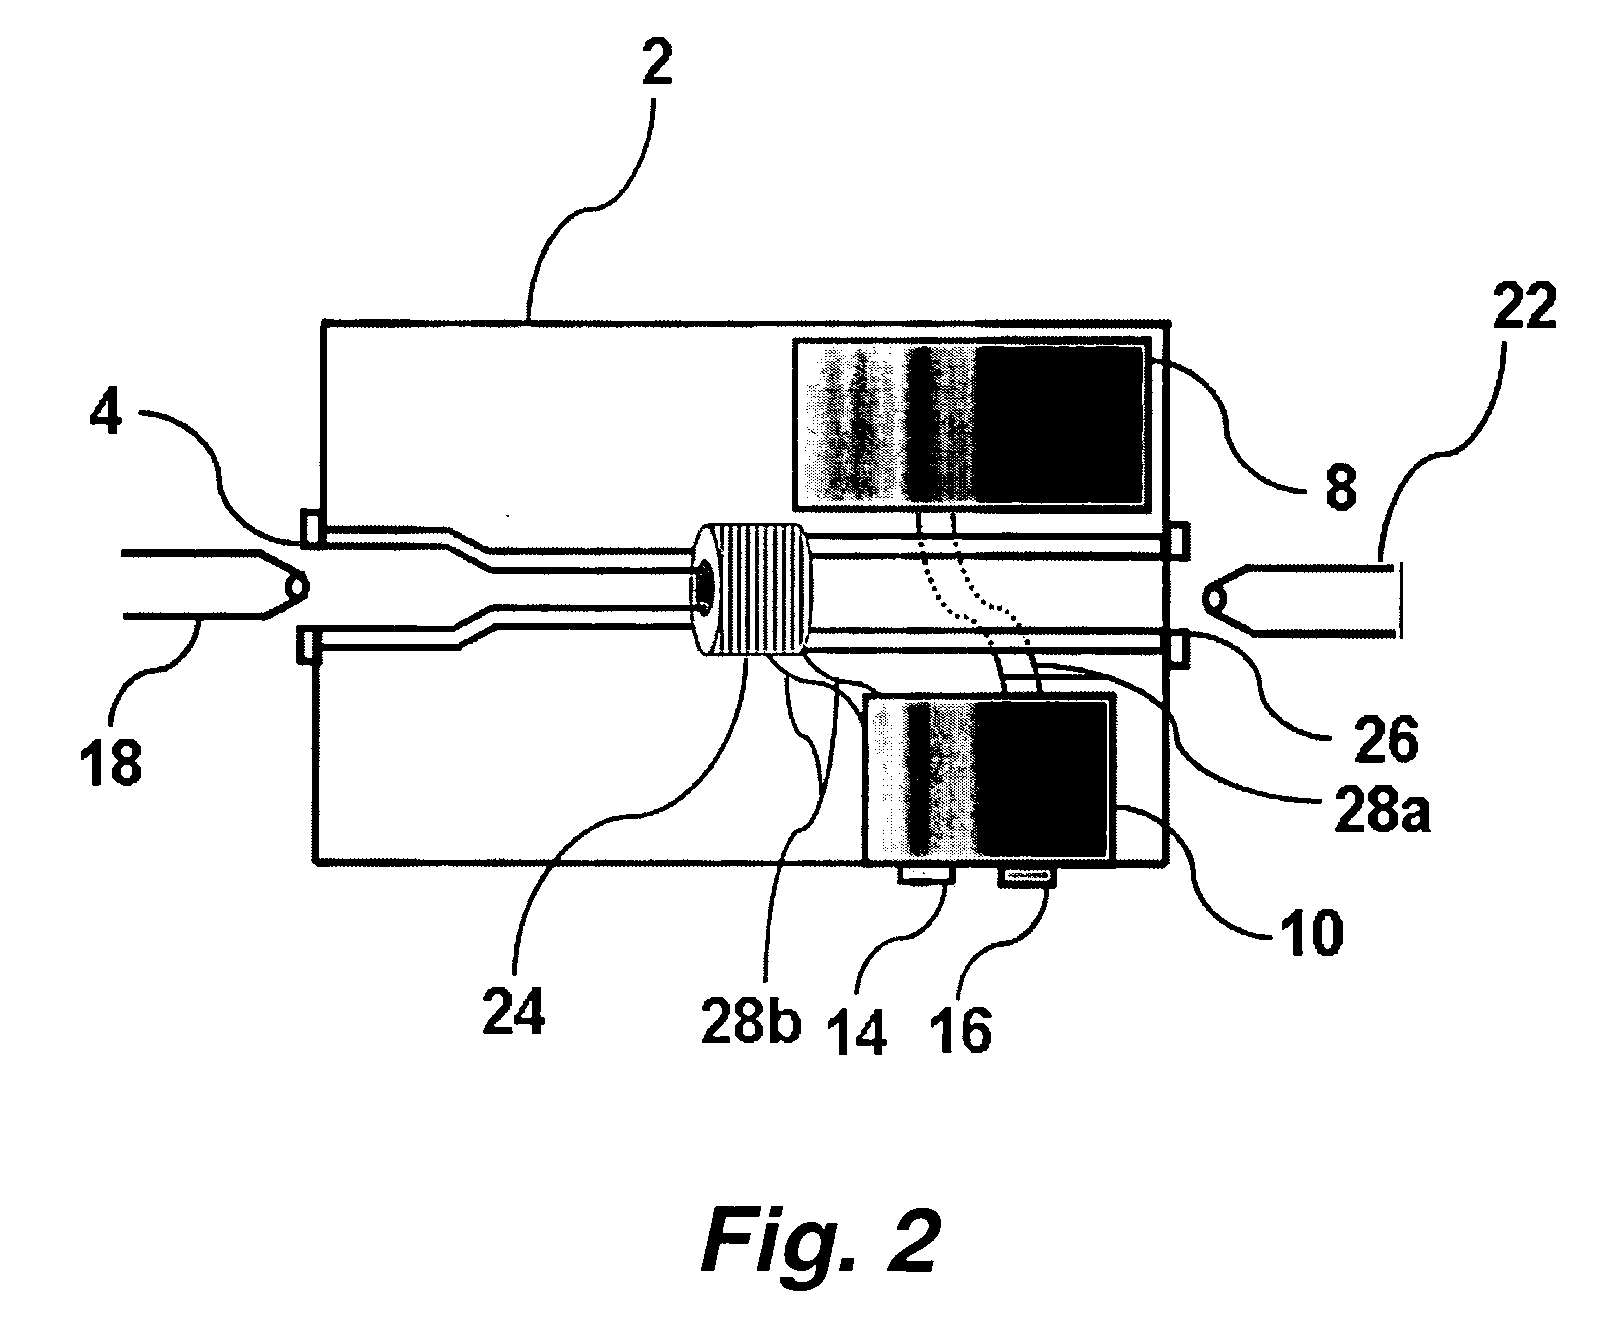 Device and systems for the intermittent drainage of urine and other biological fluids